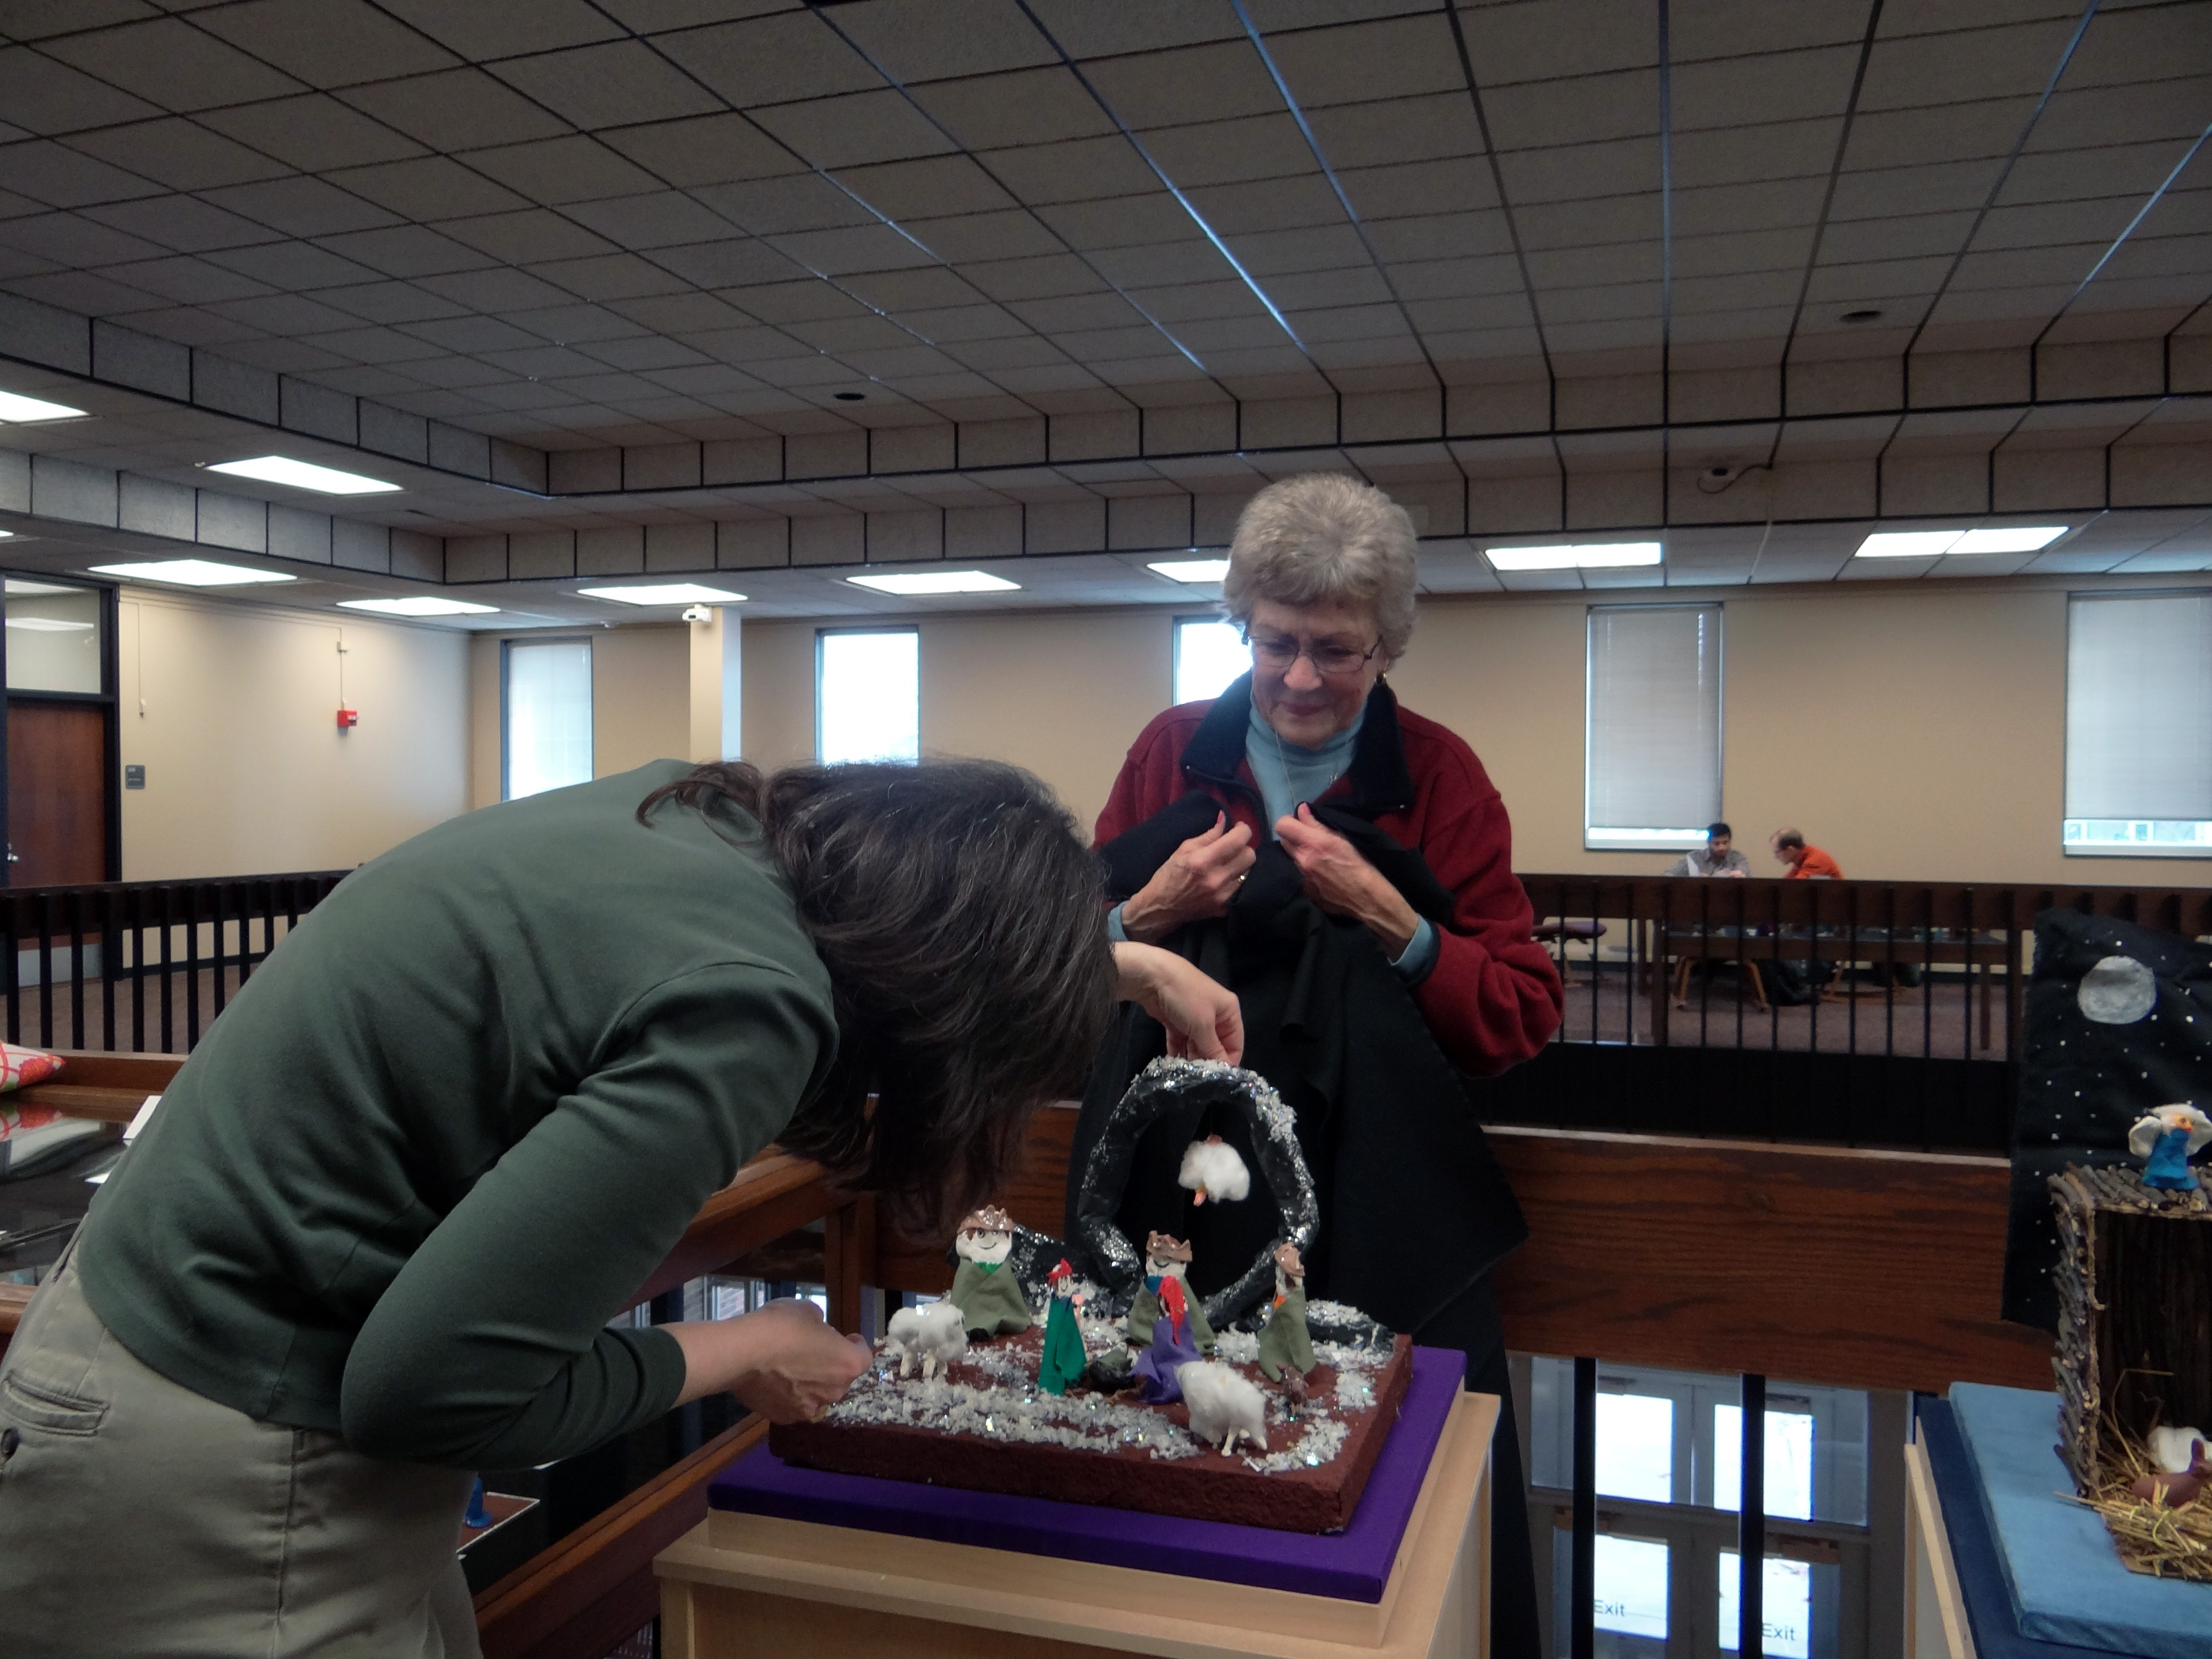 Volunteers Anne Malone and Ginny Saxton set up a nativity set for an At the Manger exhibit.